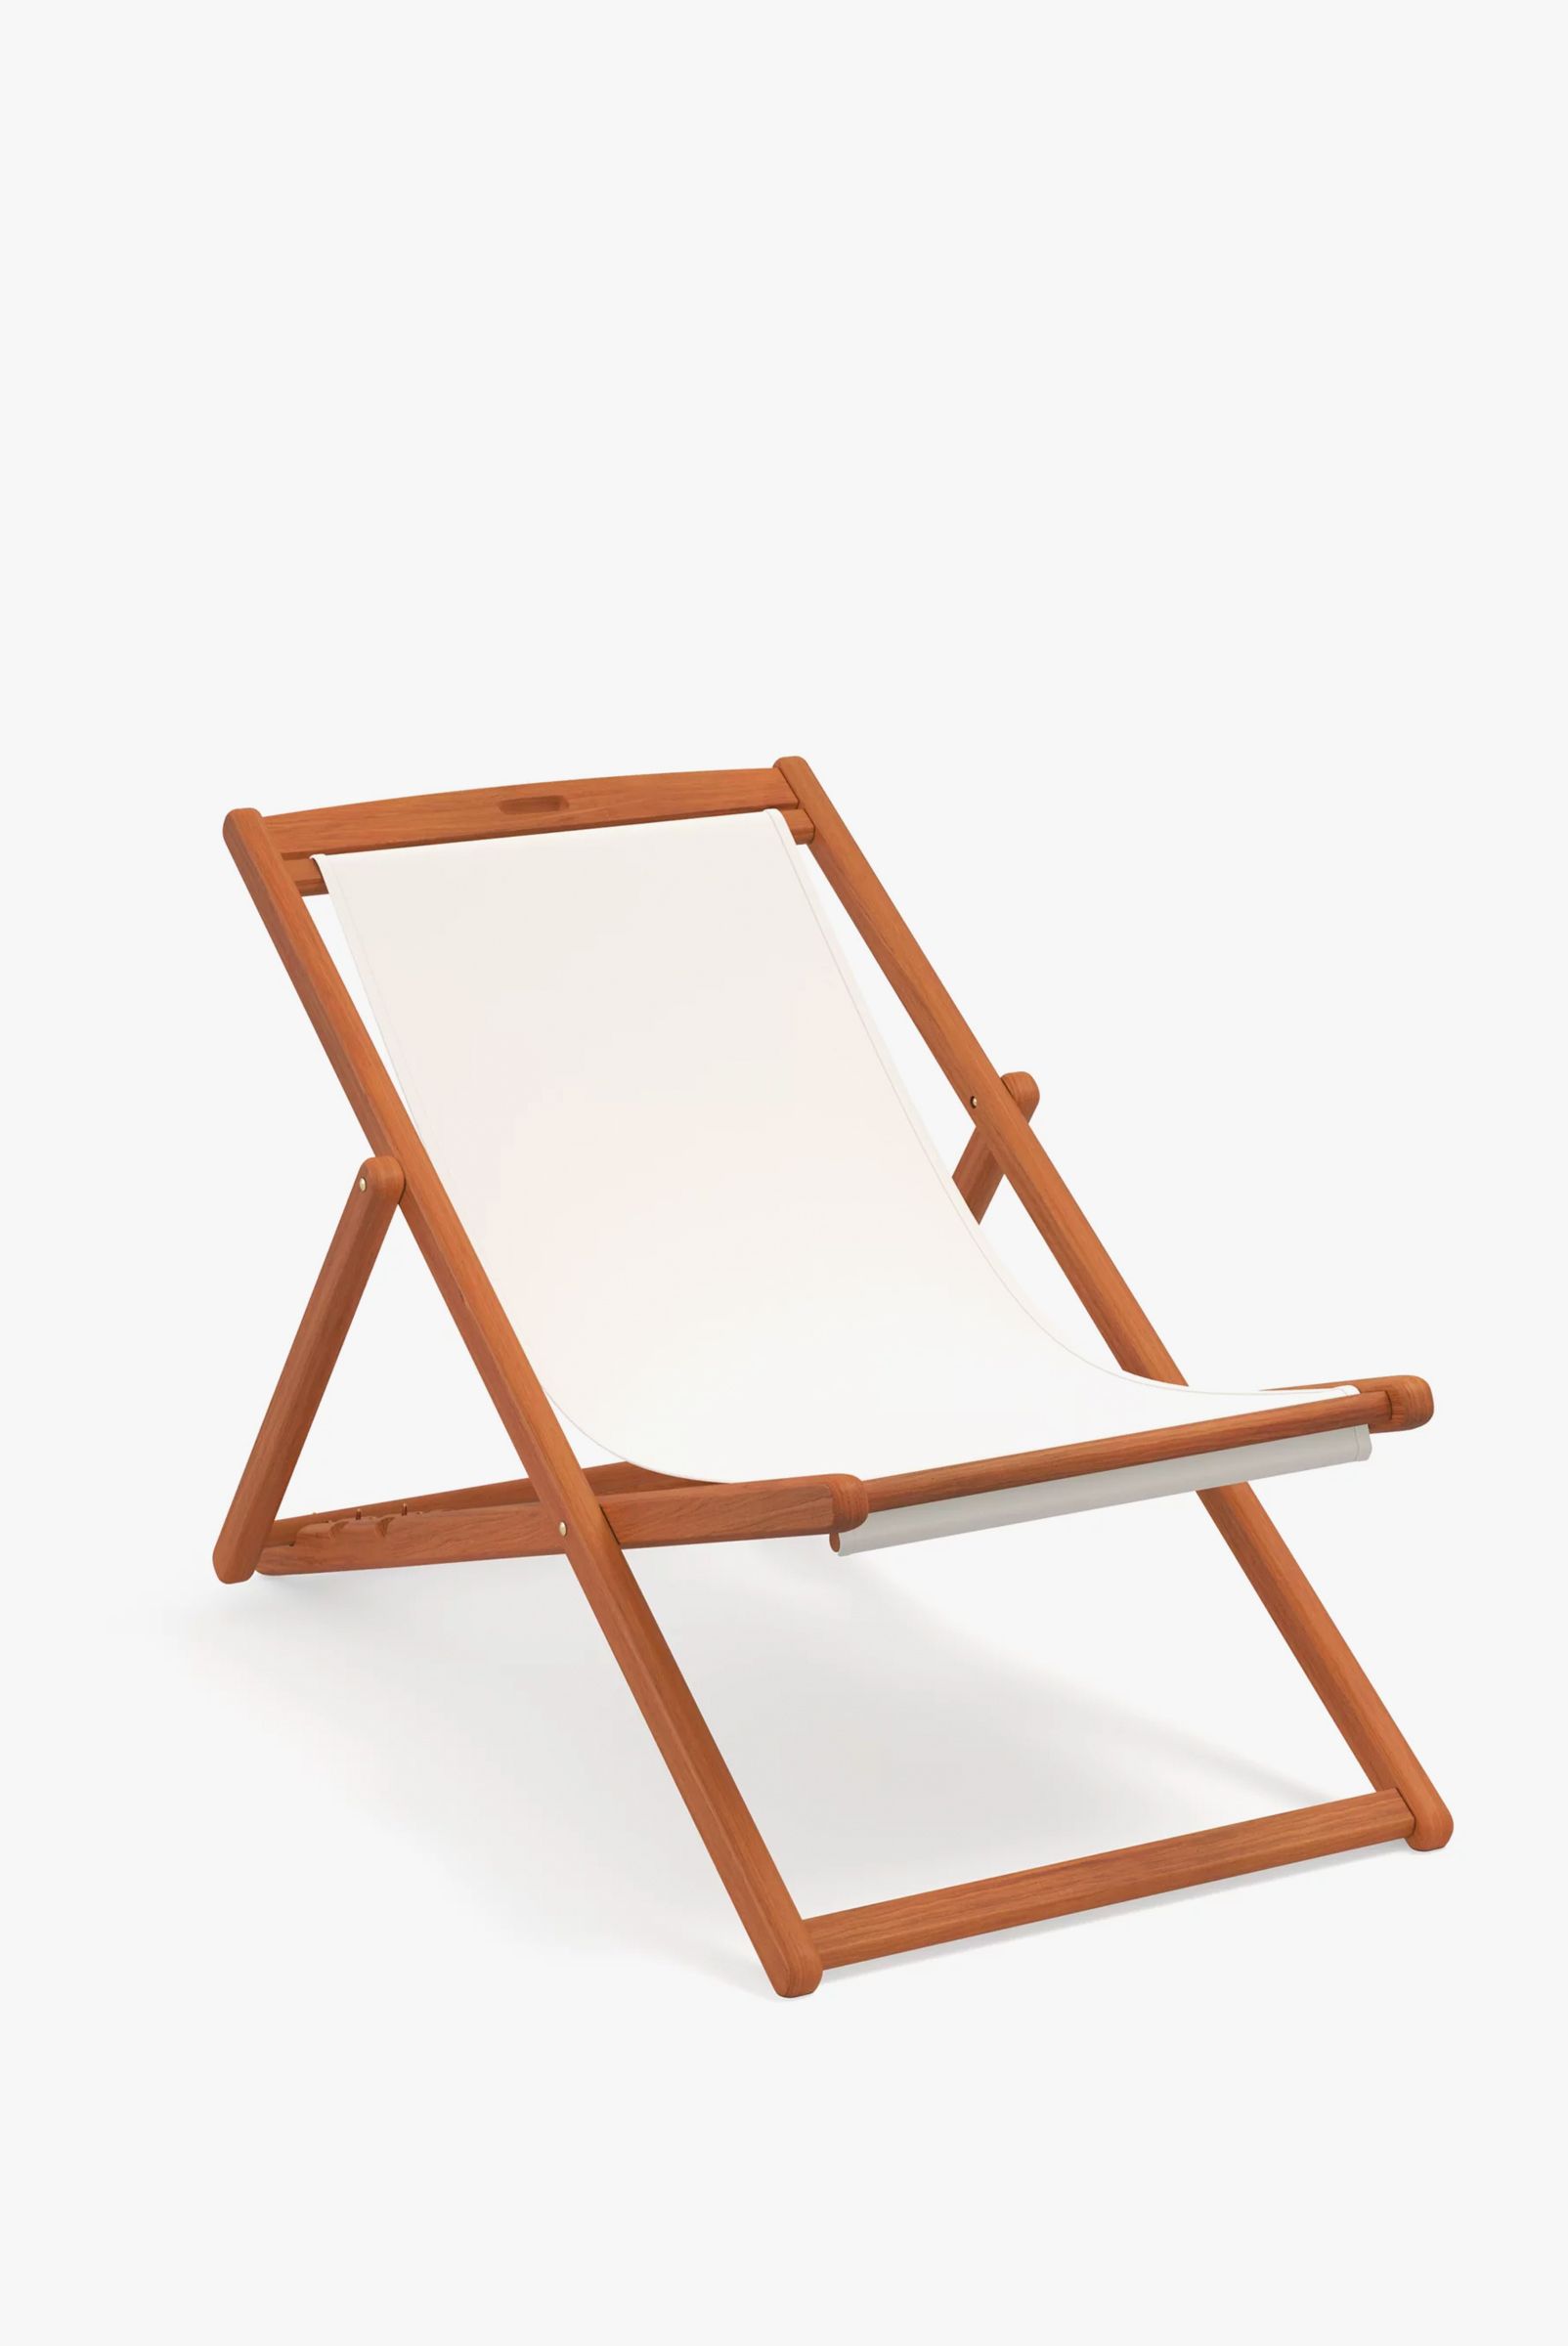 ANYDAY Deck Chair and Fabric Sling, Natural, £39